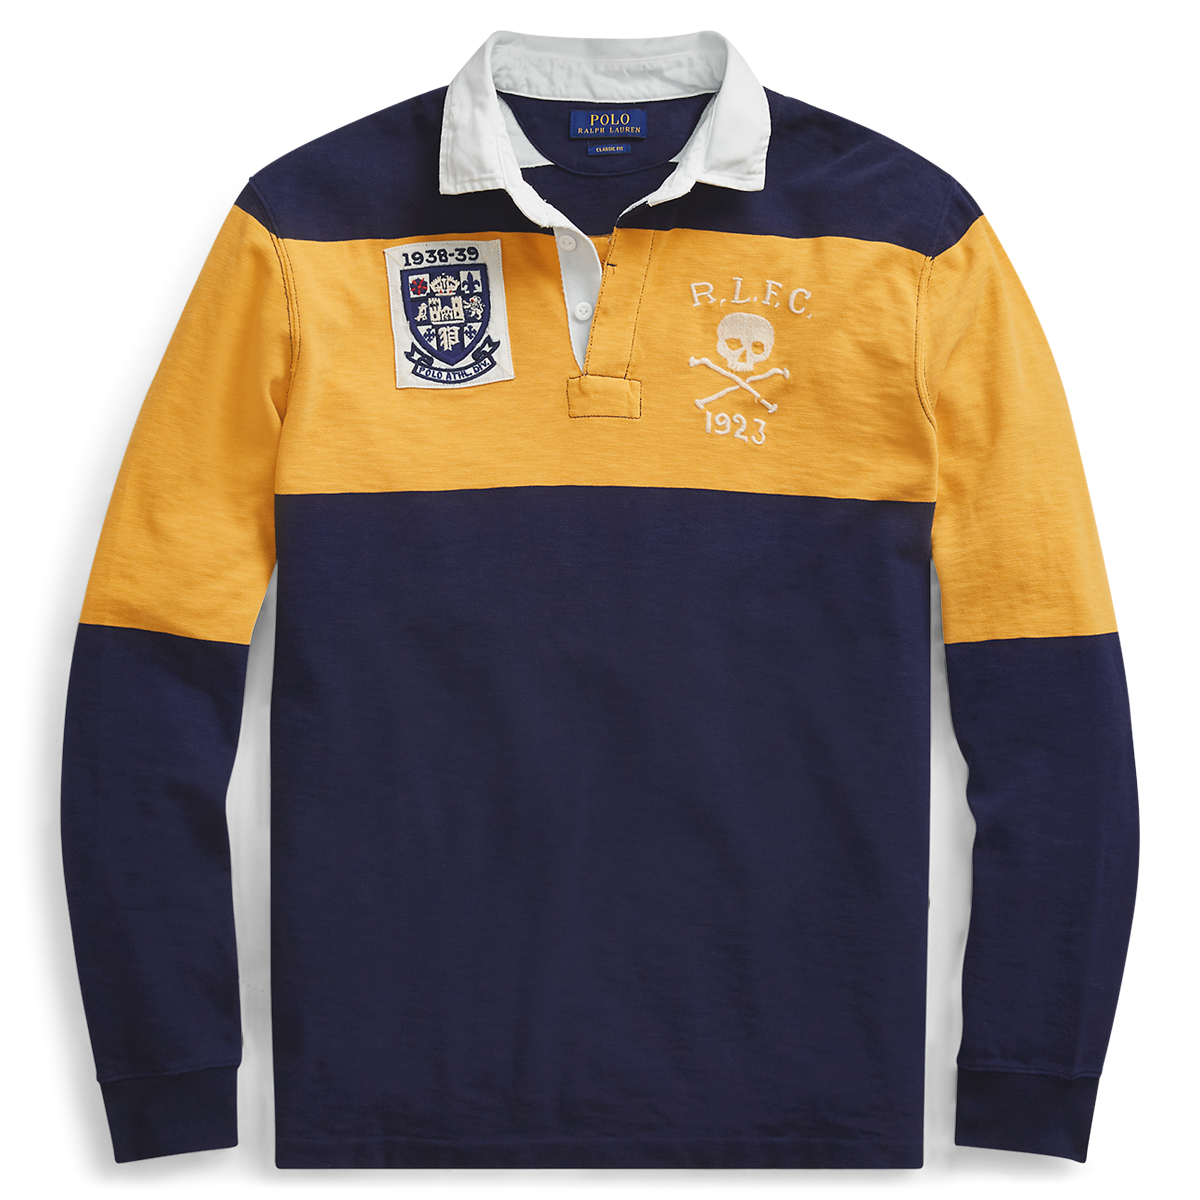 Classic Fit Cotton Rugby Shirt